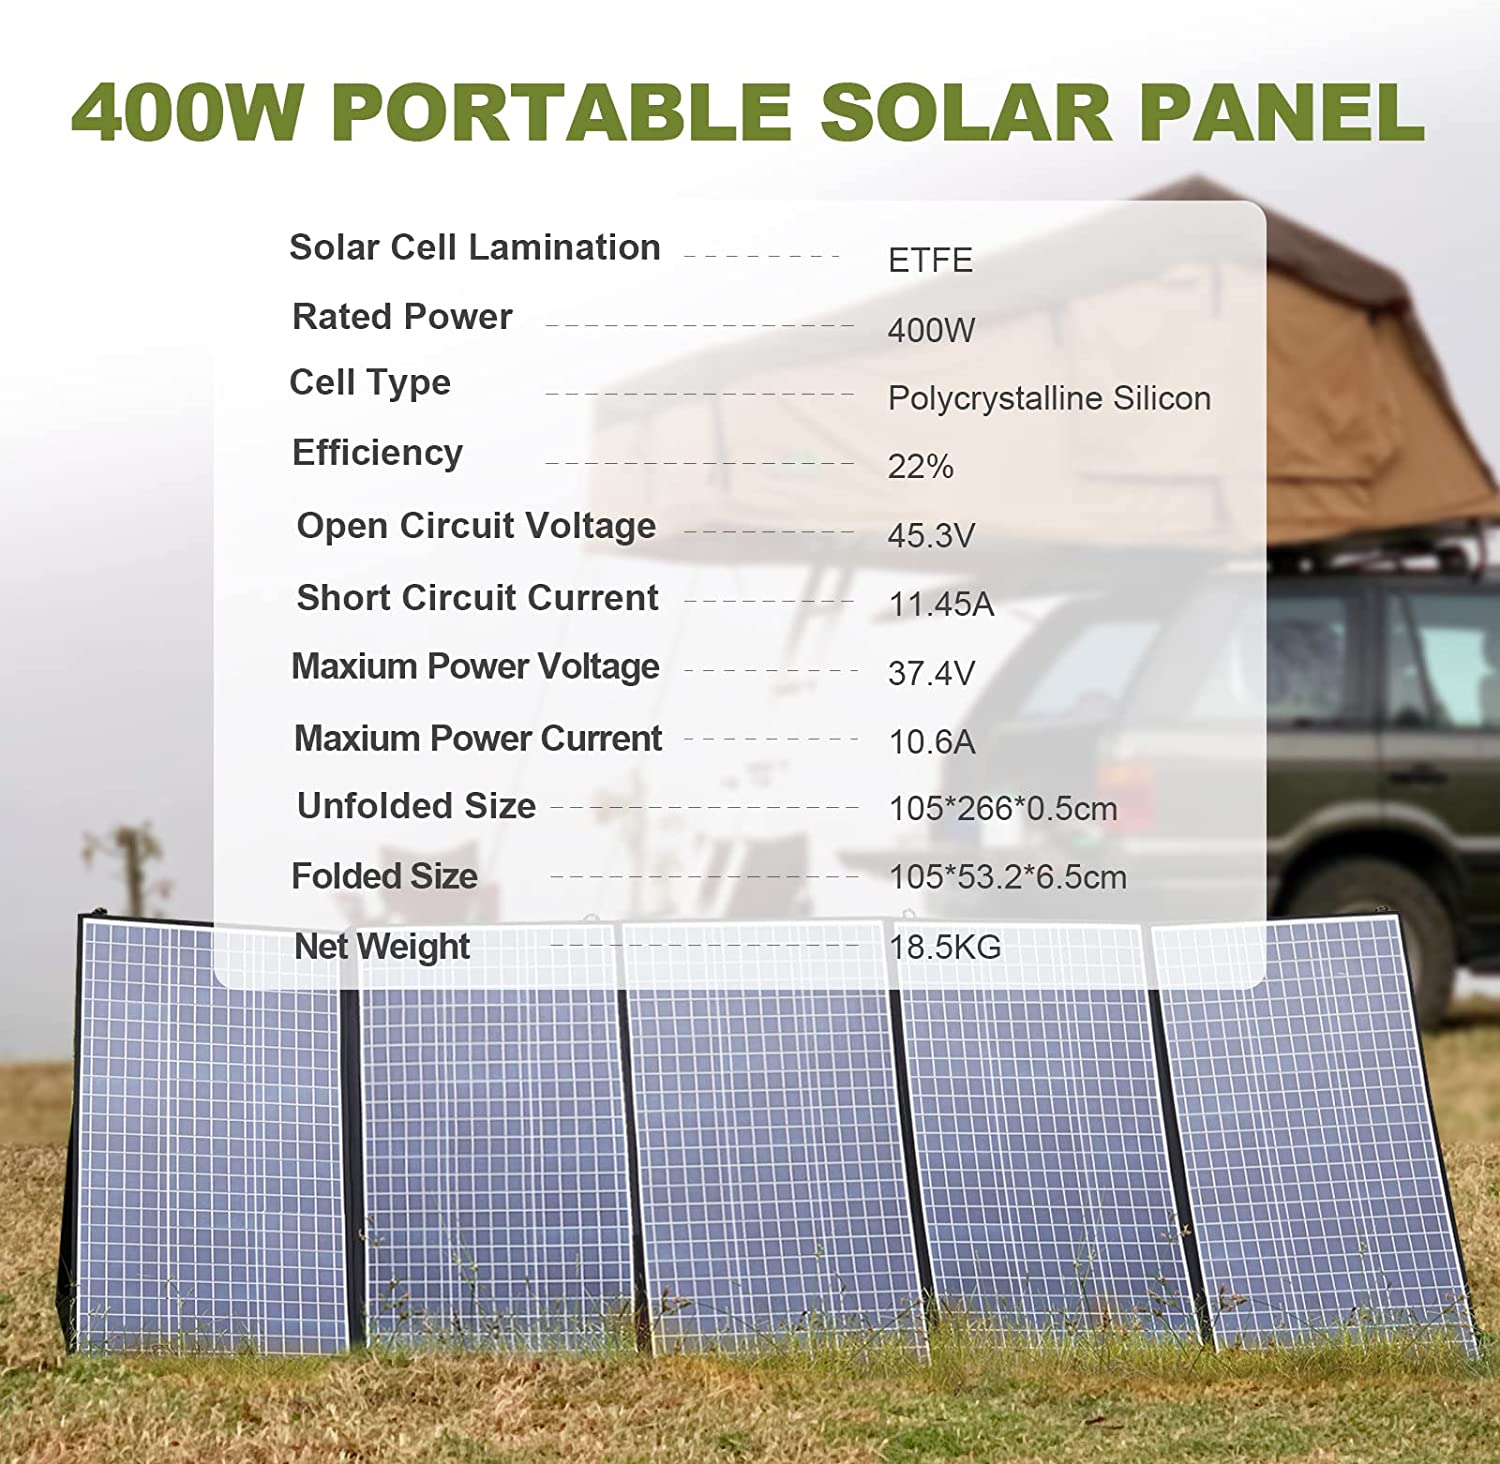 ALLPOWERS R4000 Solar Generator 4000W 3600Wh Portable Power Station with SP037 400W  Solar Panels